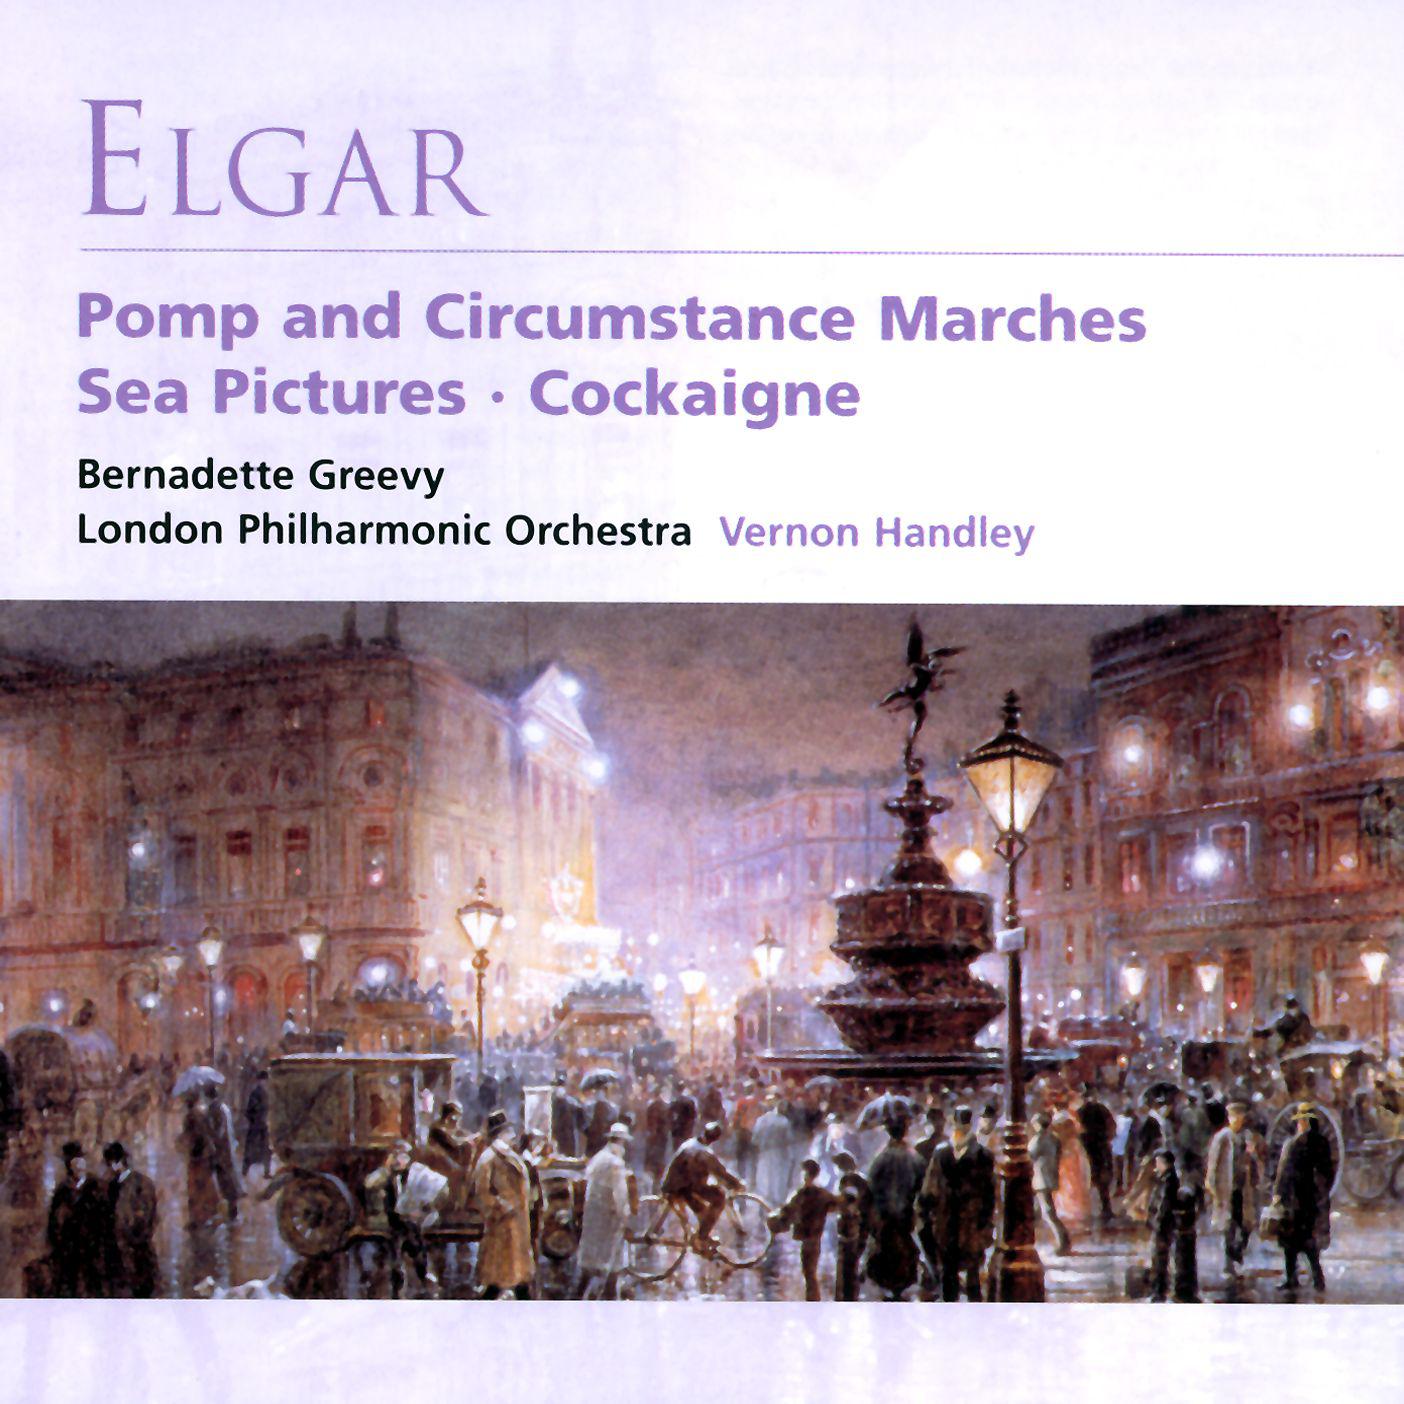 Pomp and Circumstance - Military Marches, Op.39: No. 3 in C Minor